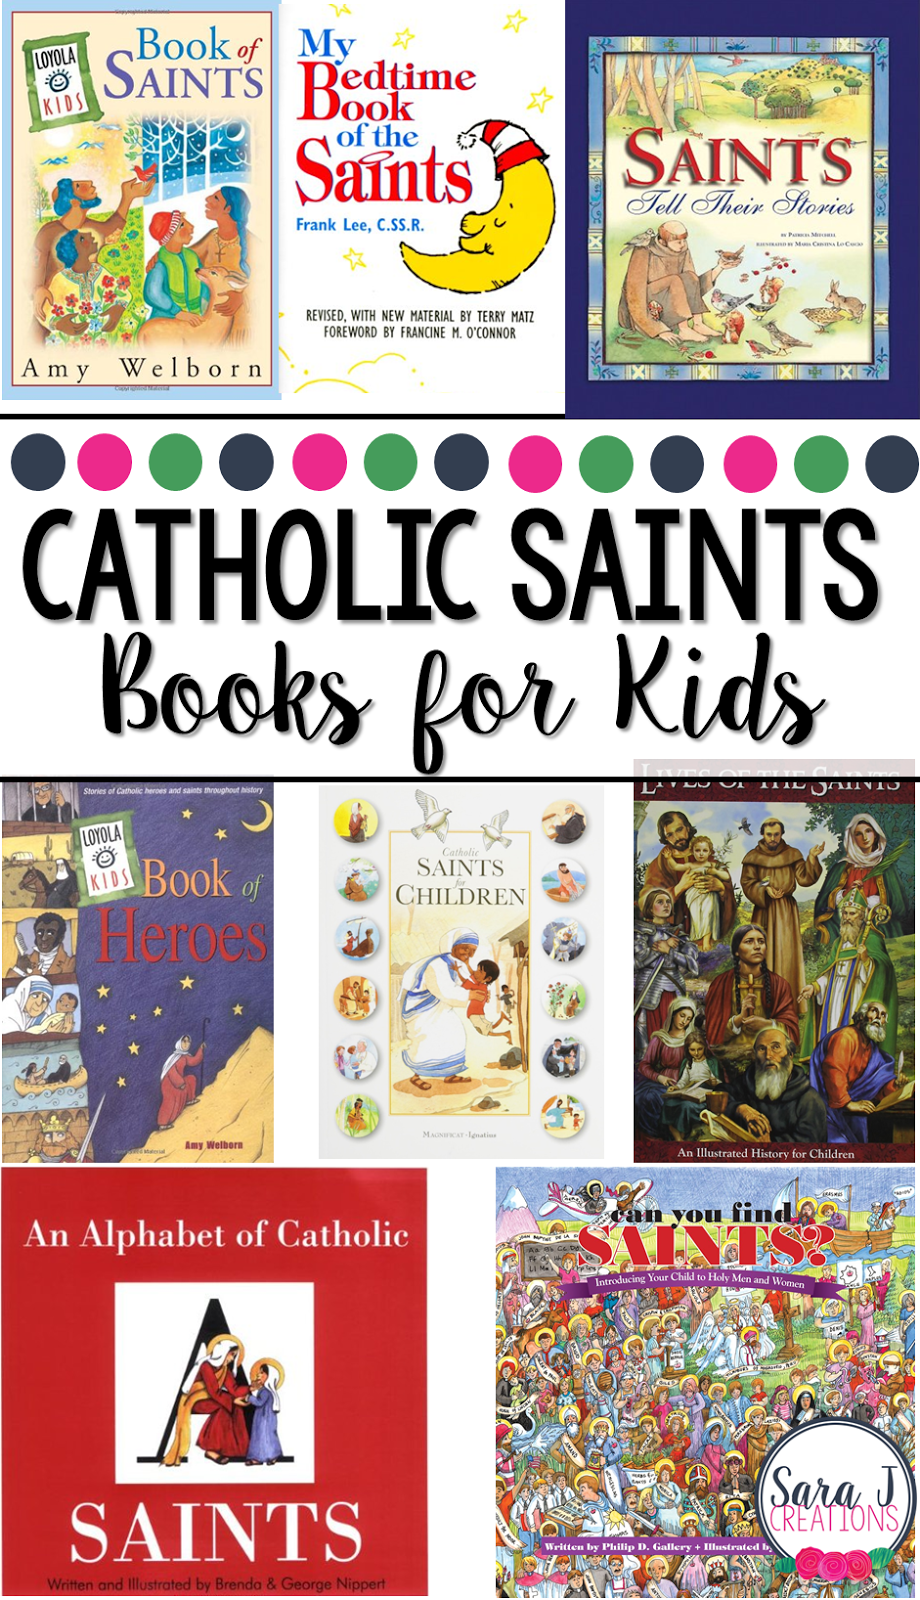 I like this list of eight books to teach kids about Catholic Saints.  So helpful when teaching children the faith.